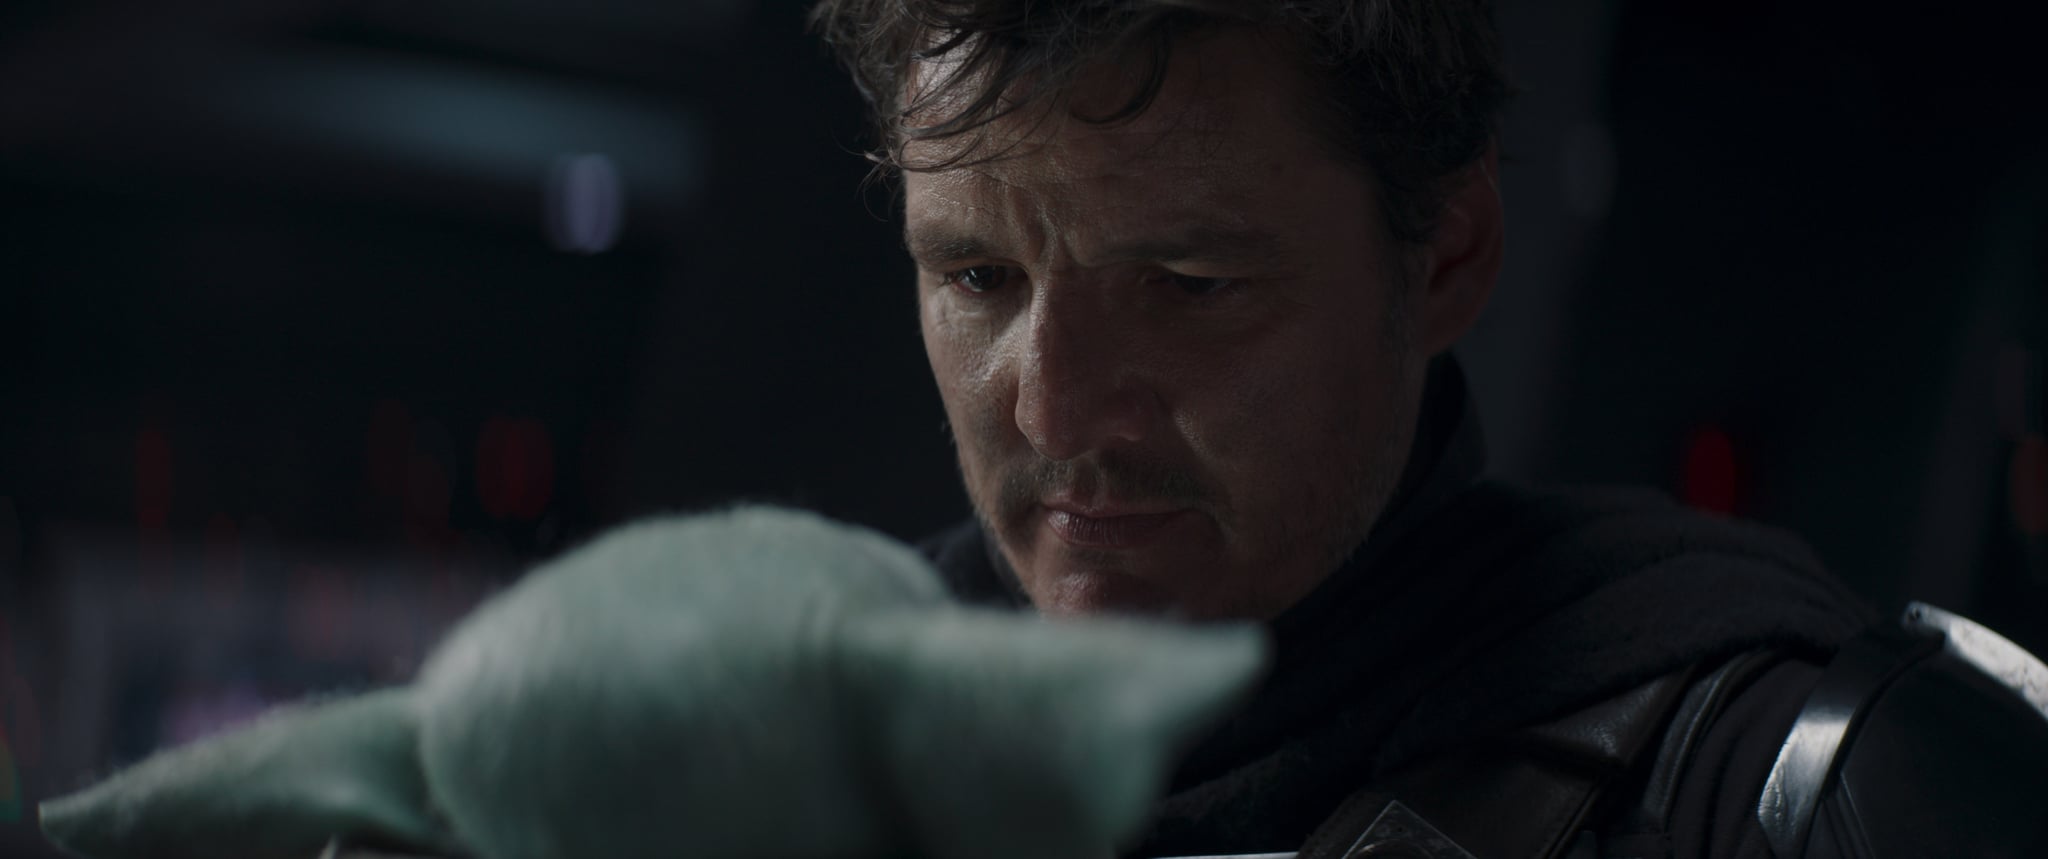 Grogu and the Mandalorian (Pedro Pascal) in Lucasfilm's THE MANDALORIAN, season two, exclusively on Disney+. © 2020 Lucasfilm Ltd. & ™. All Rights Reserved.